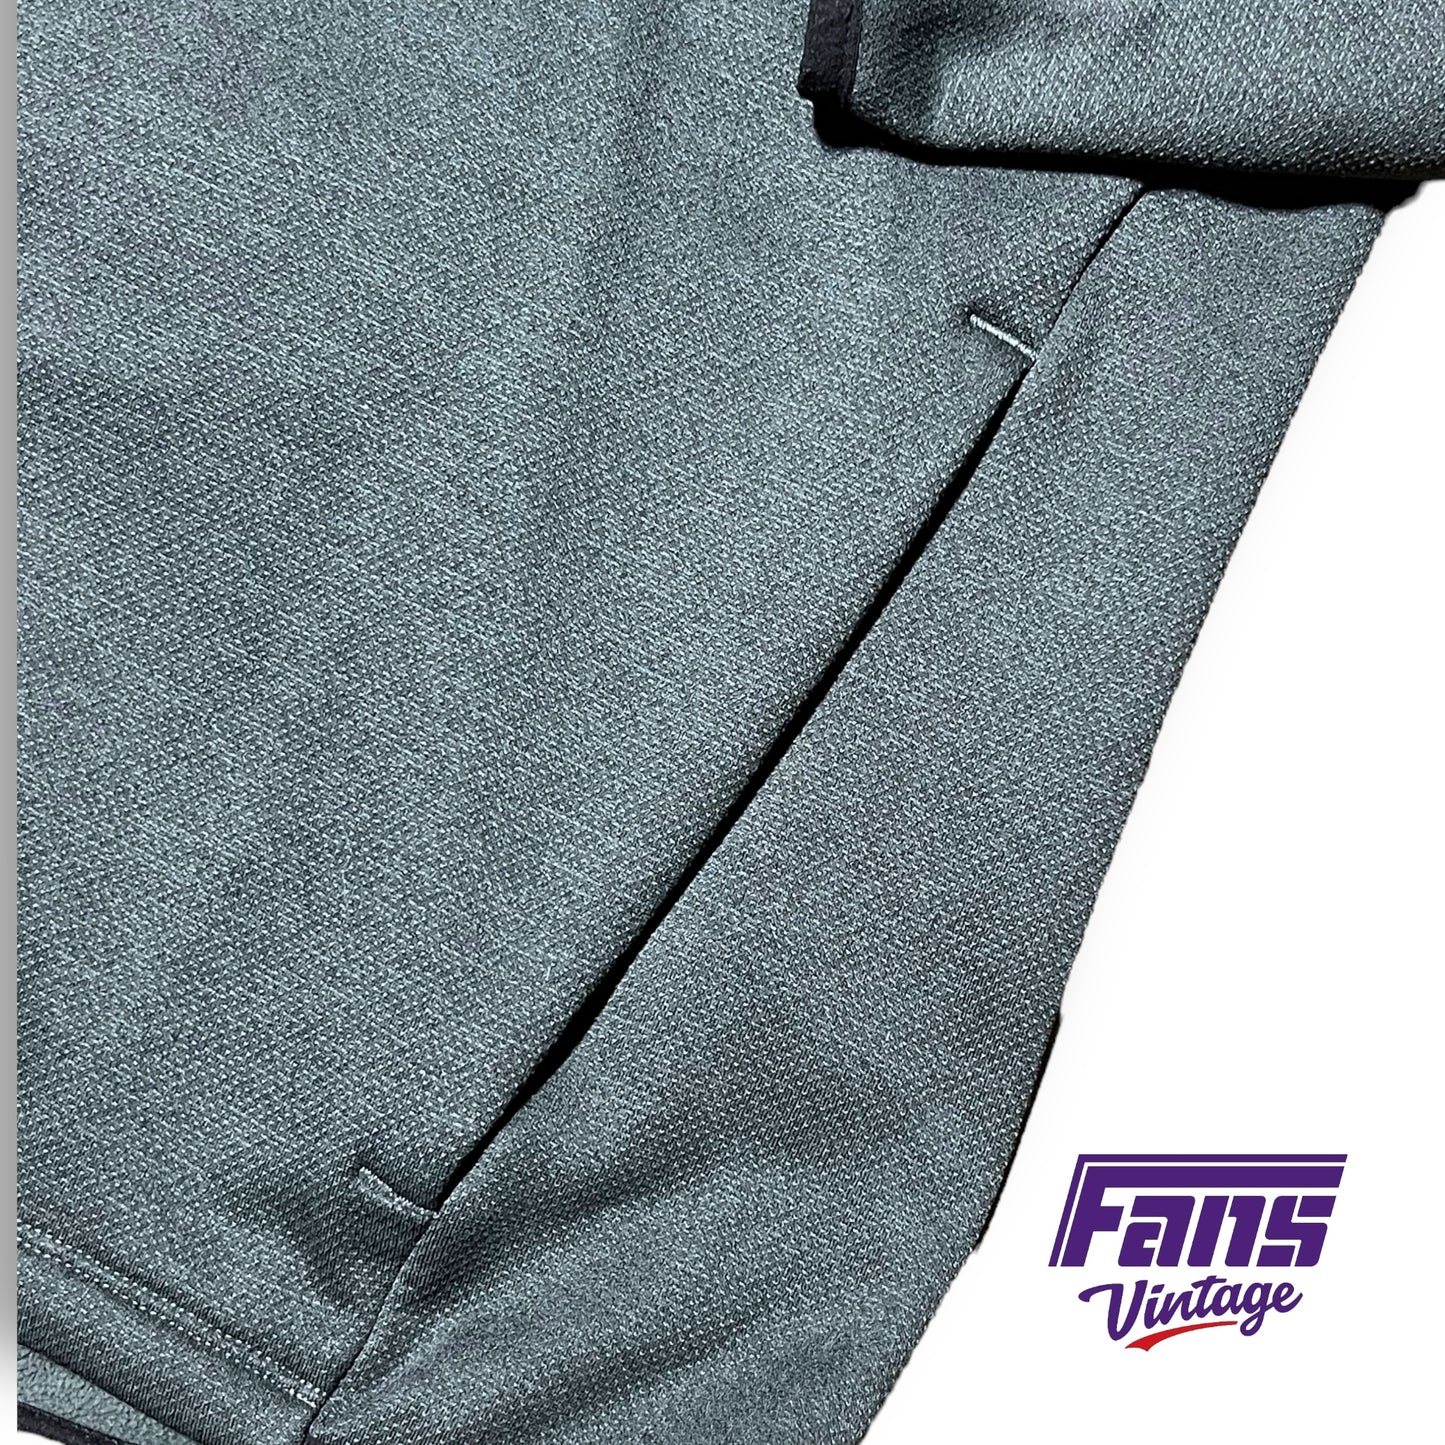 TCU Basketball Coach Exclusive Premium Nike Quarter Zip Pullover - Awesome Details!